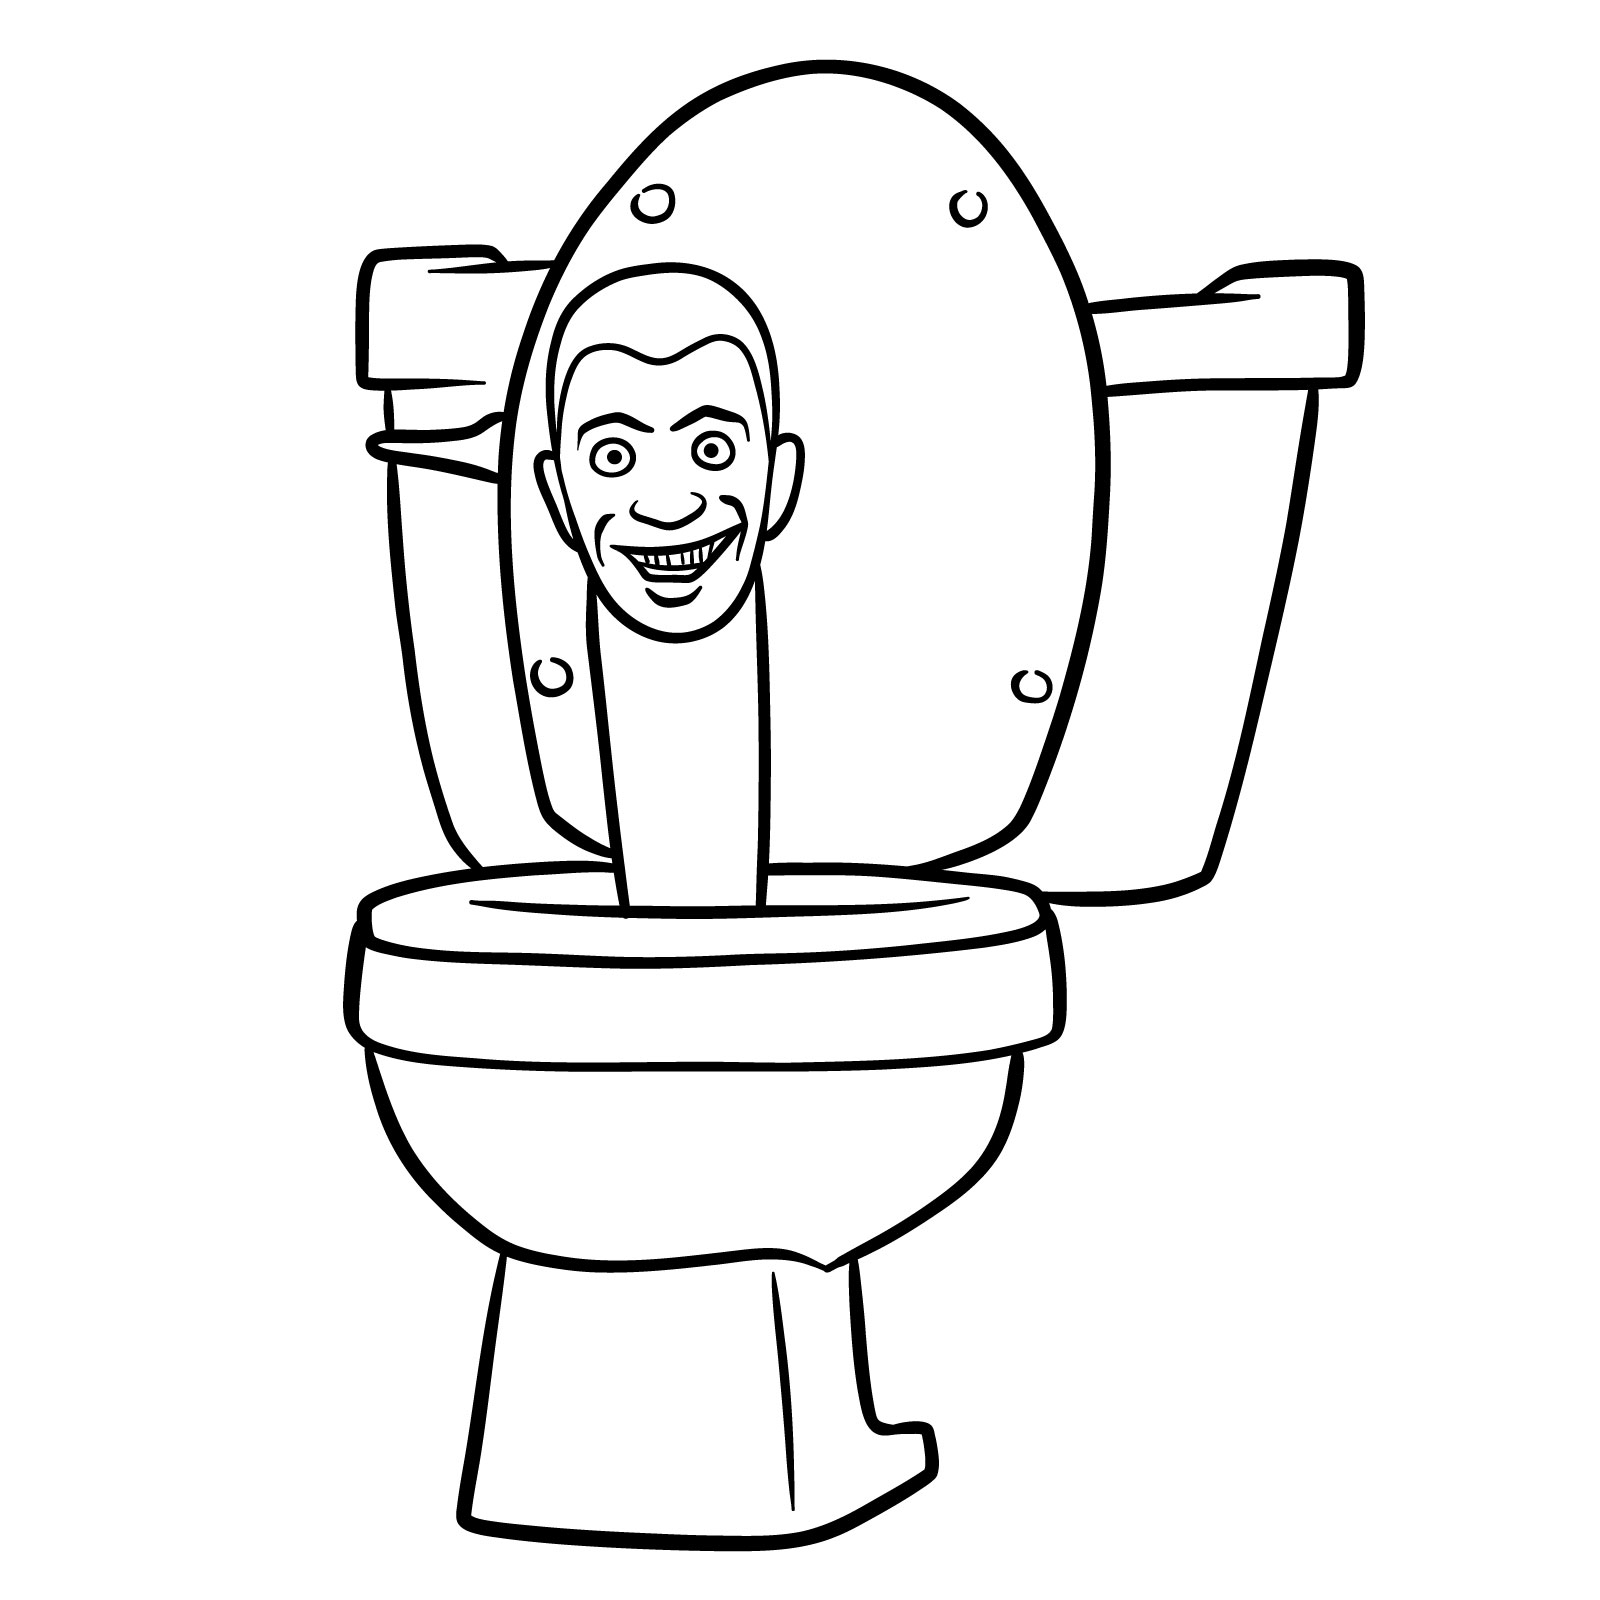 How to Draw Skibidi Toilet: 6 Detailed Drawing Guides in 1